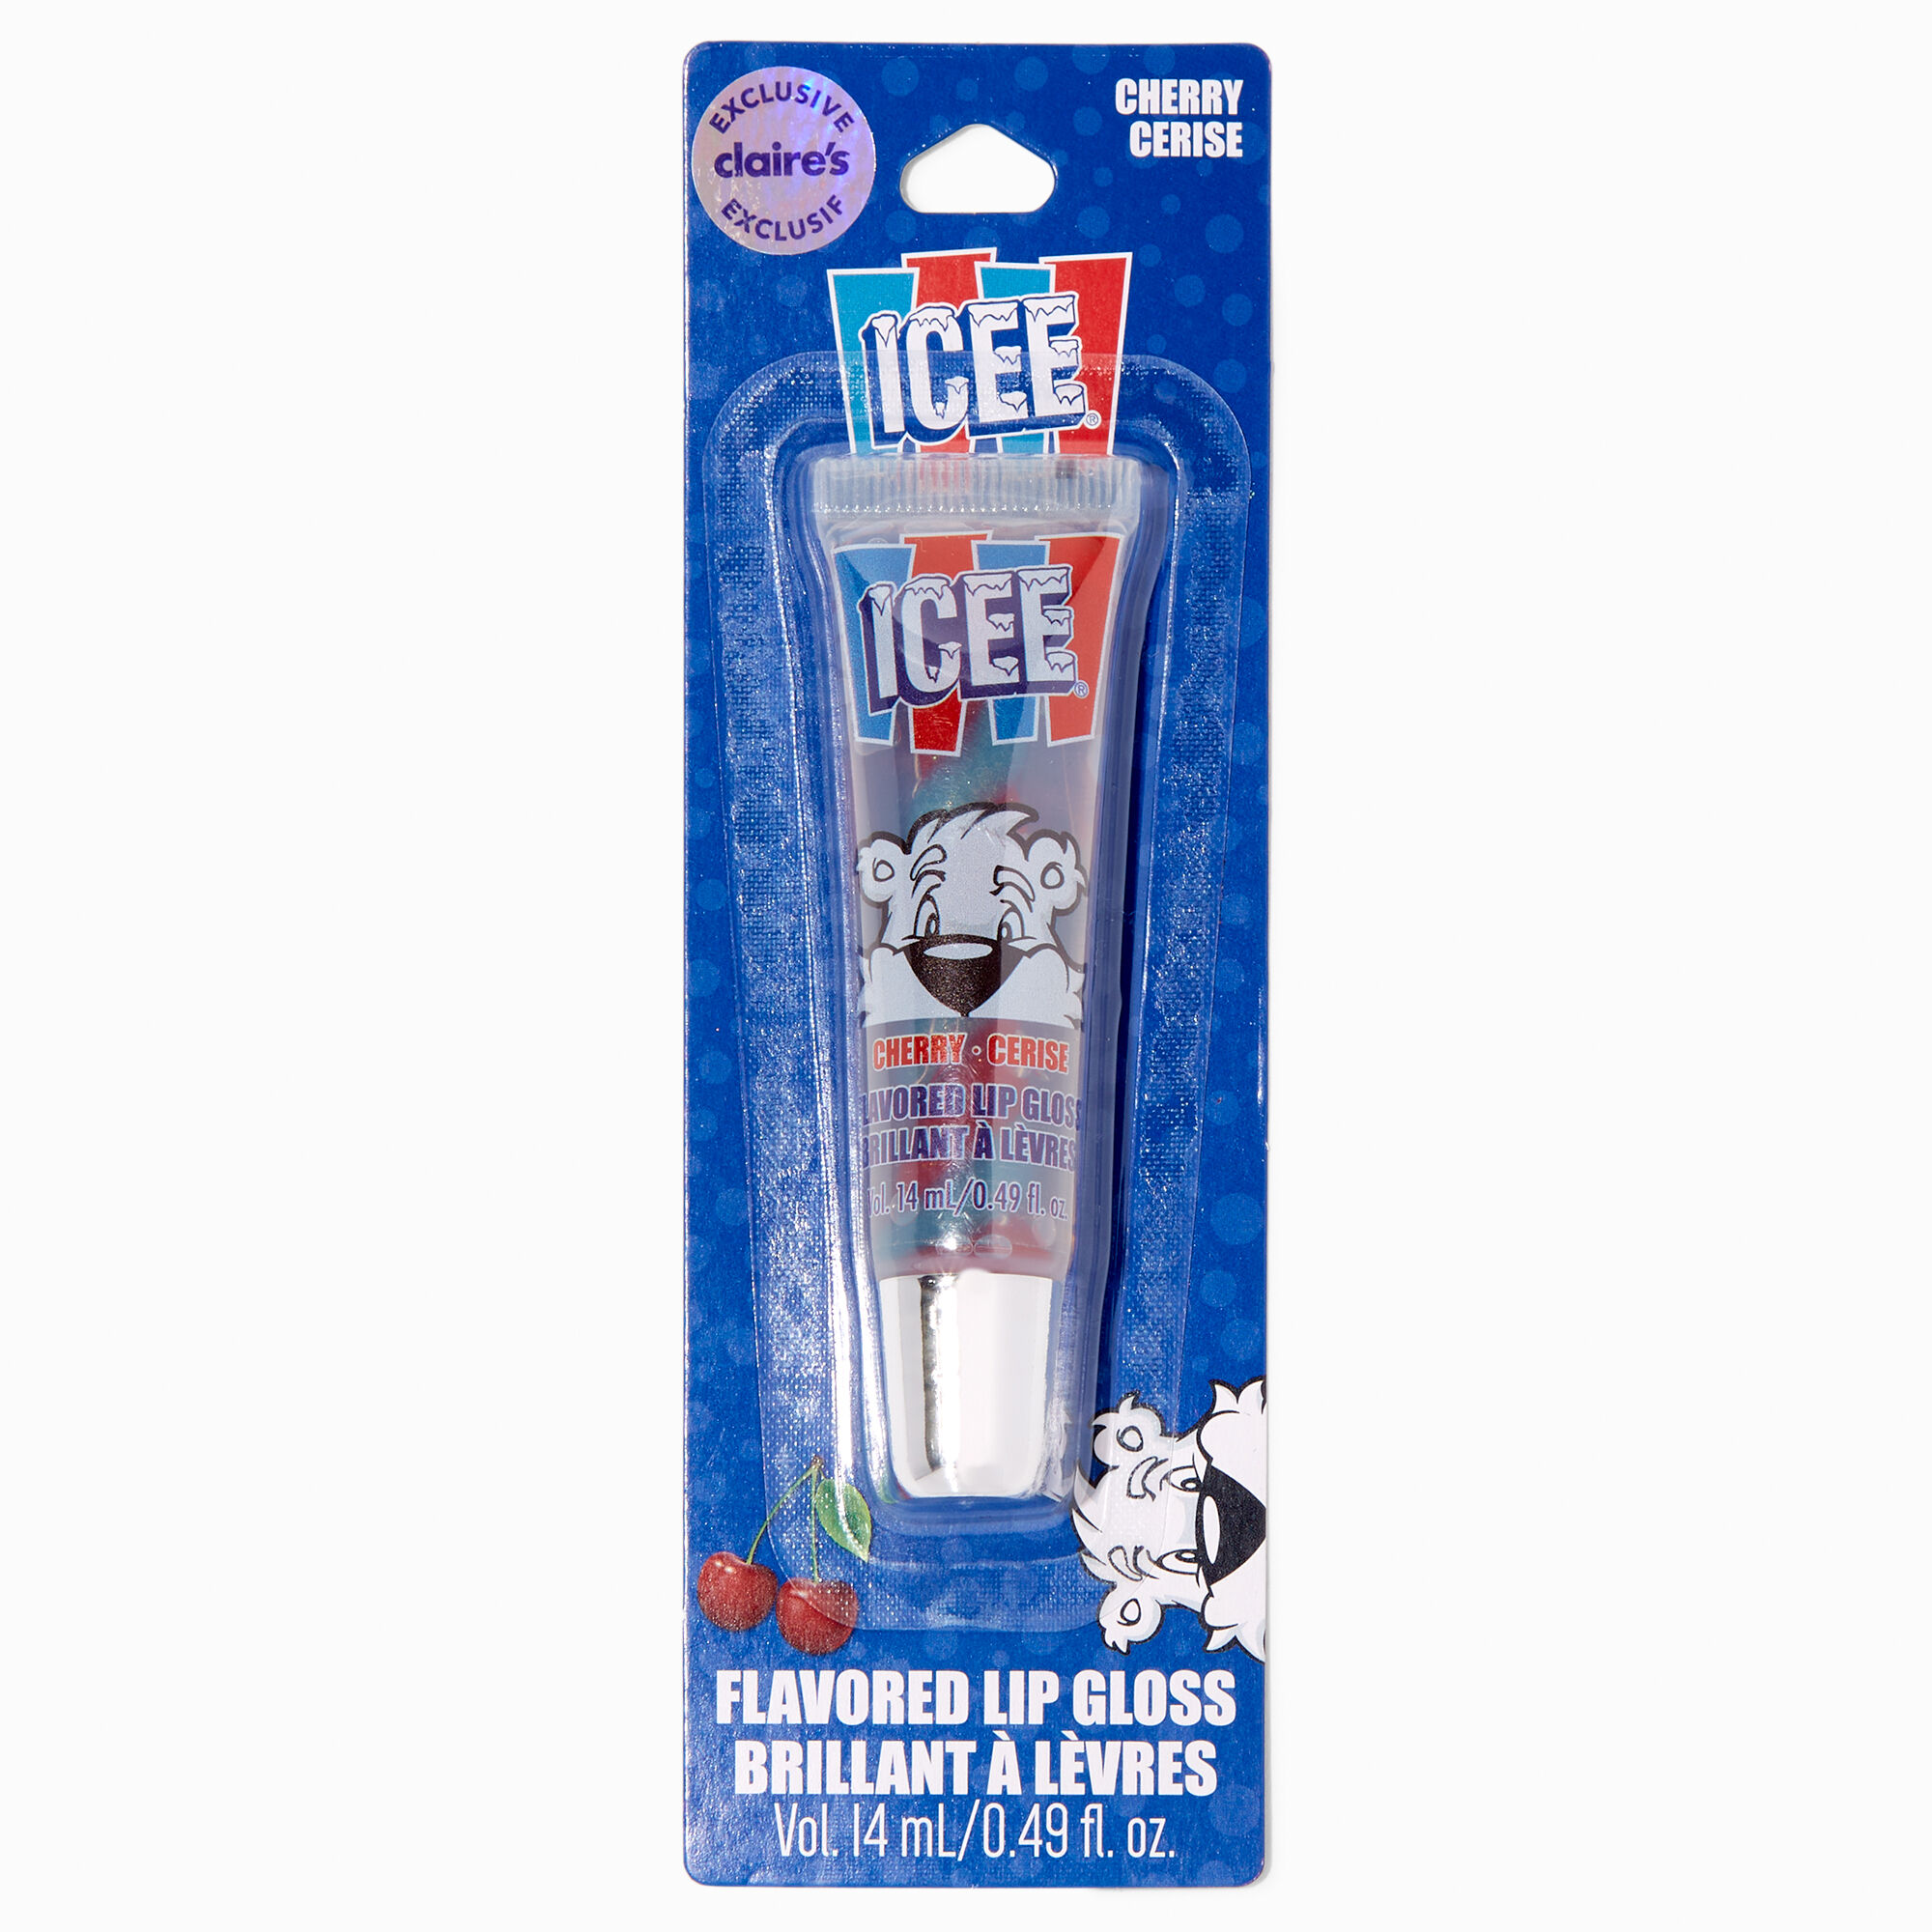 View Icee Claires Exclusive Flavored Lip Gloss Tube information